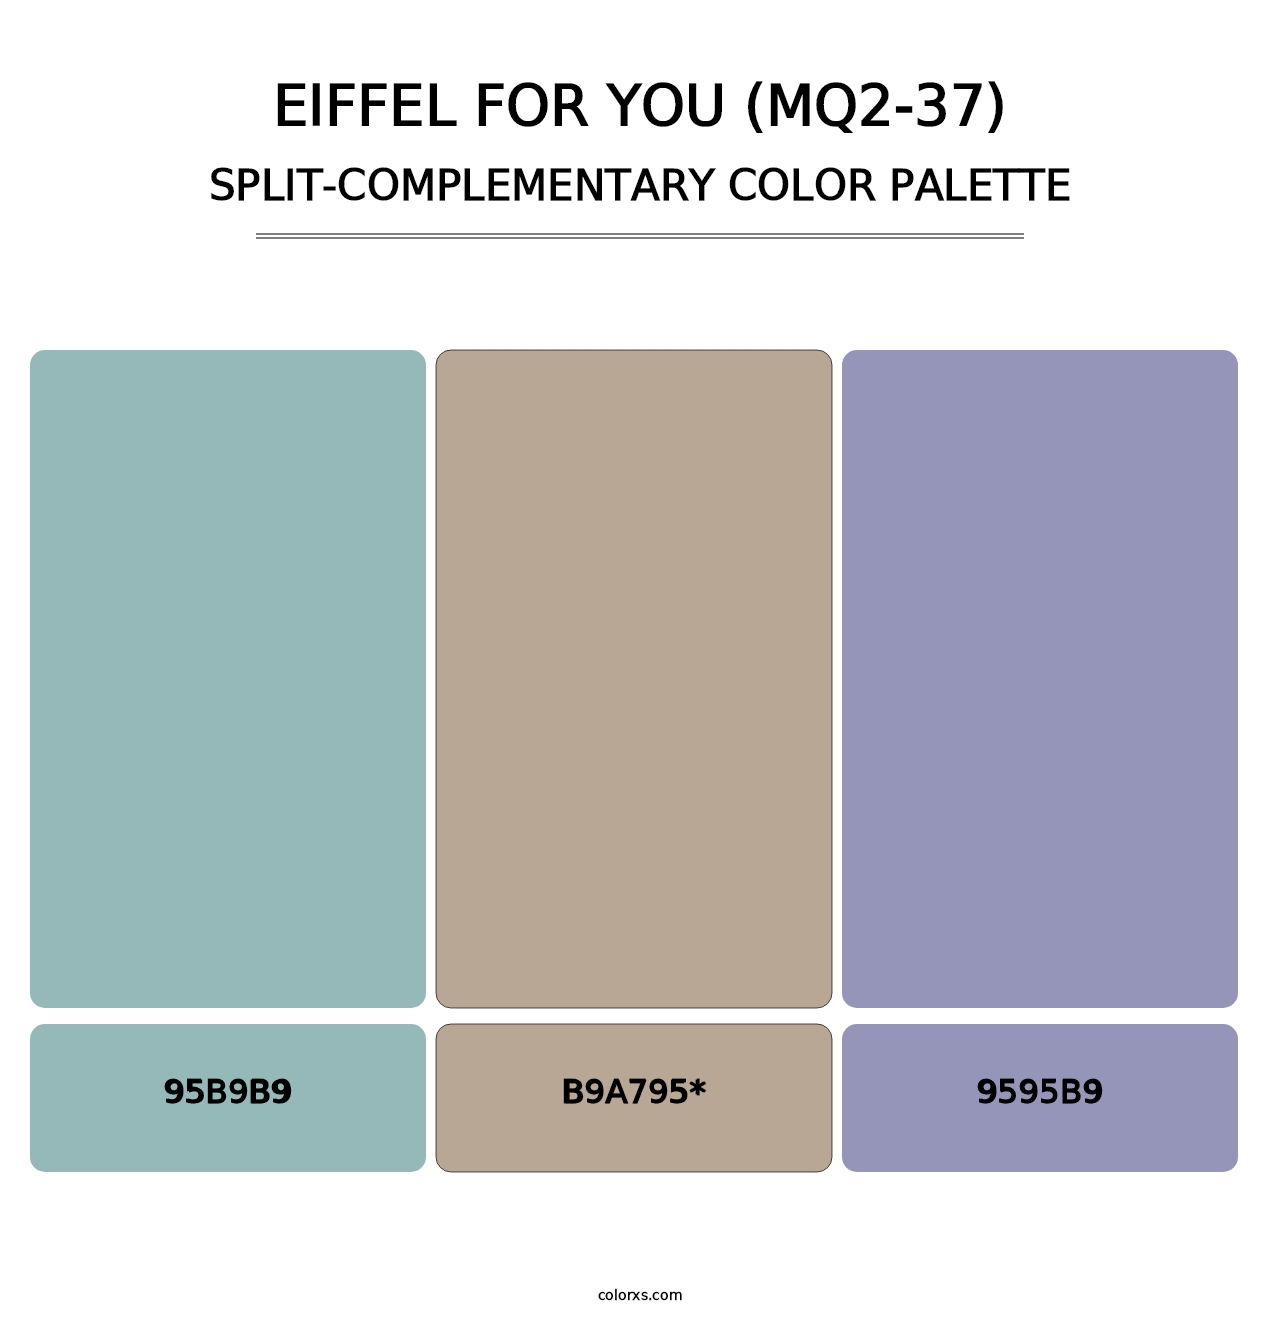 Eiffel For You (MQ2-37) - Split-Complementary Color Palette